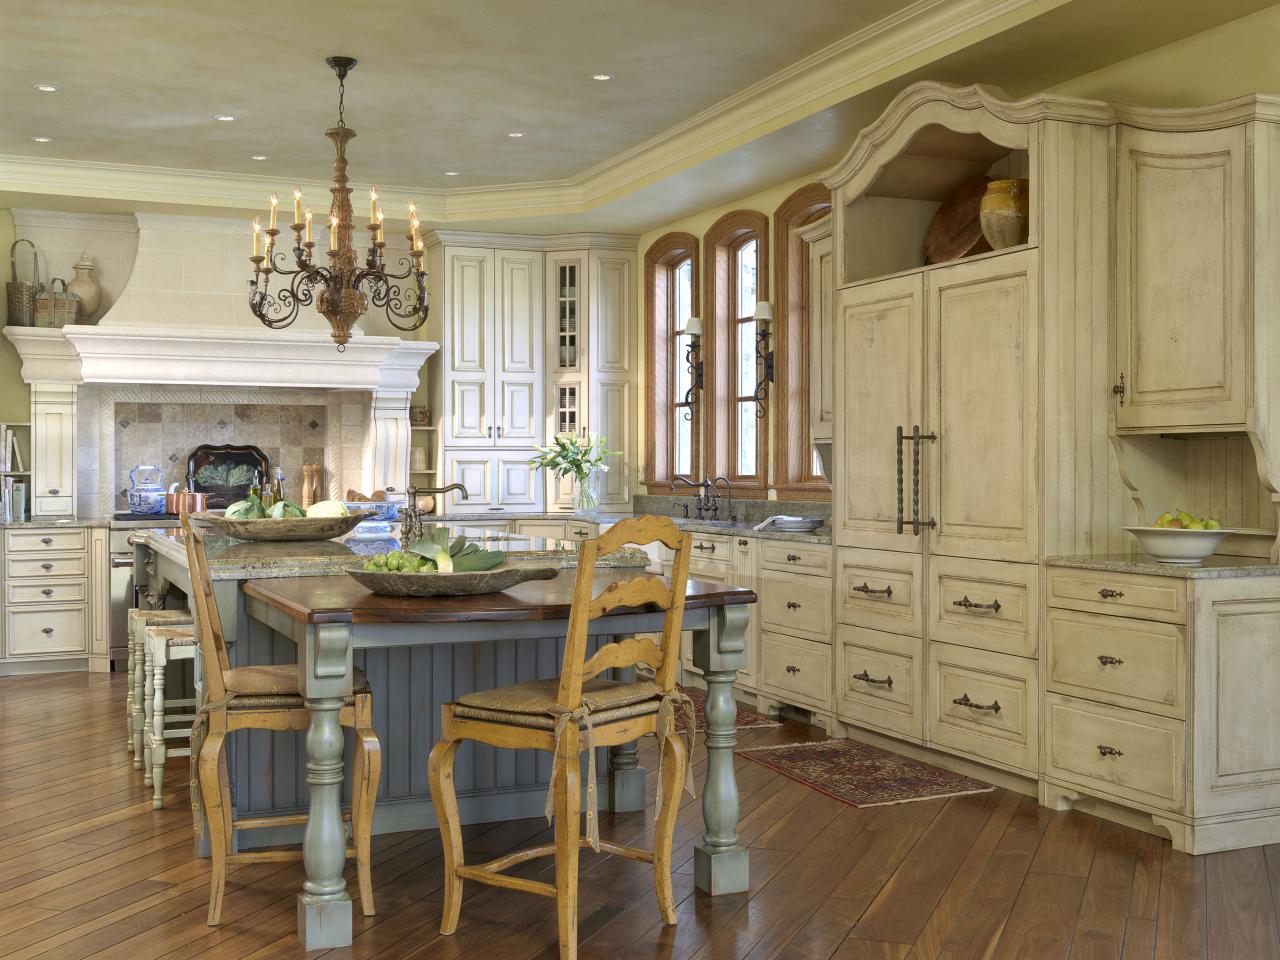 Country Kitchens : Definition, Ideas, Info